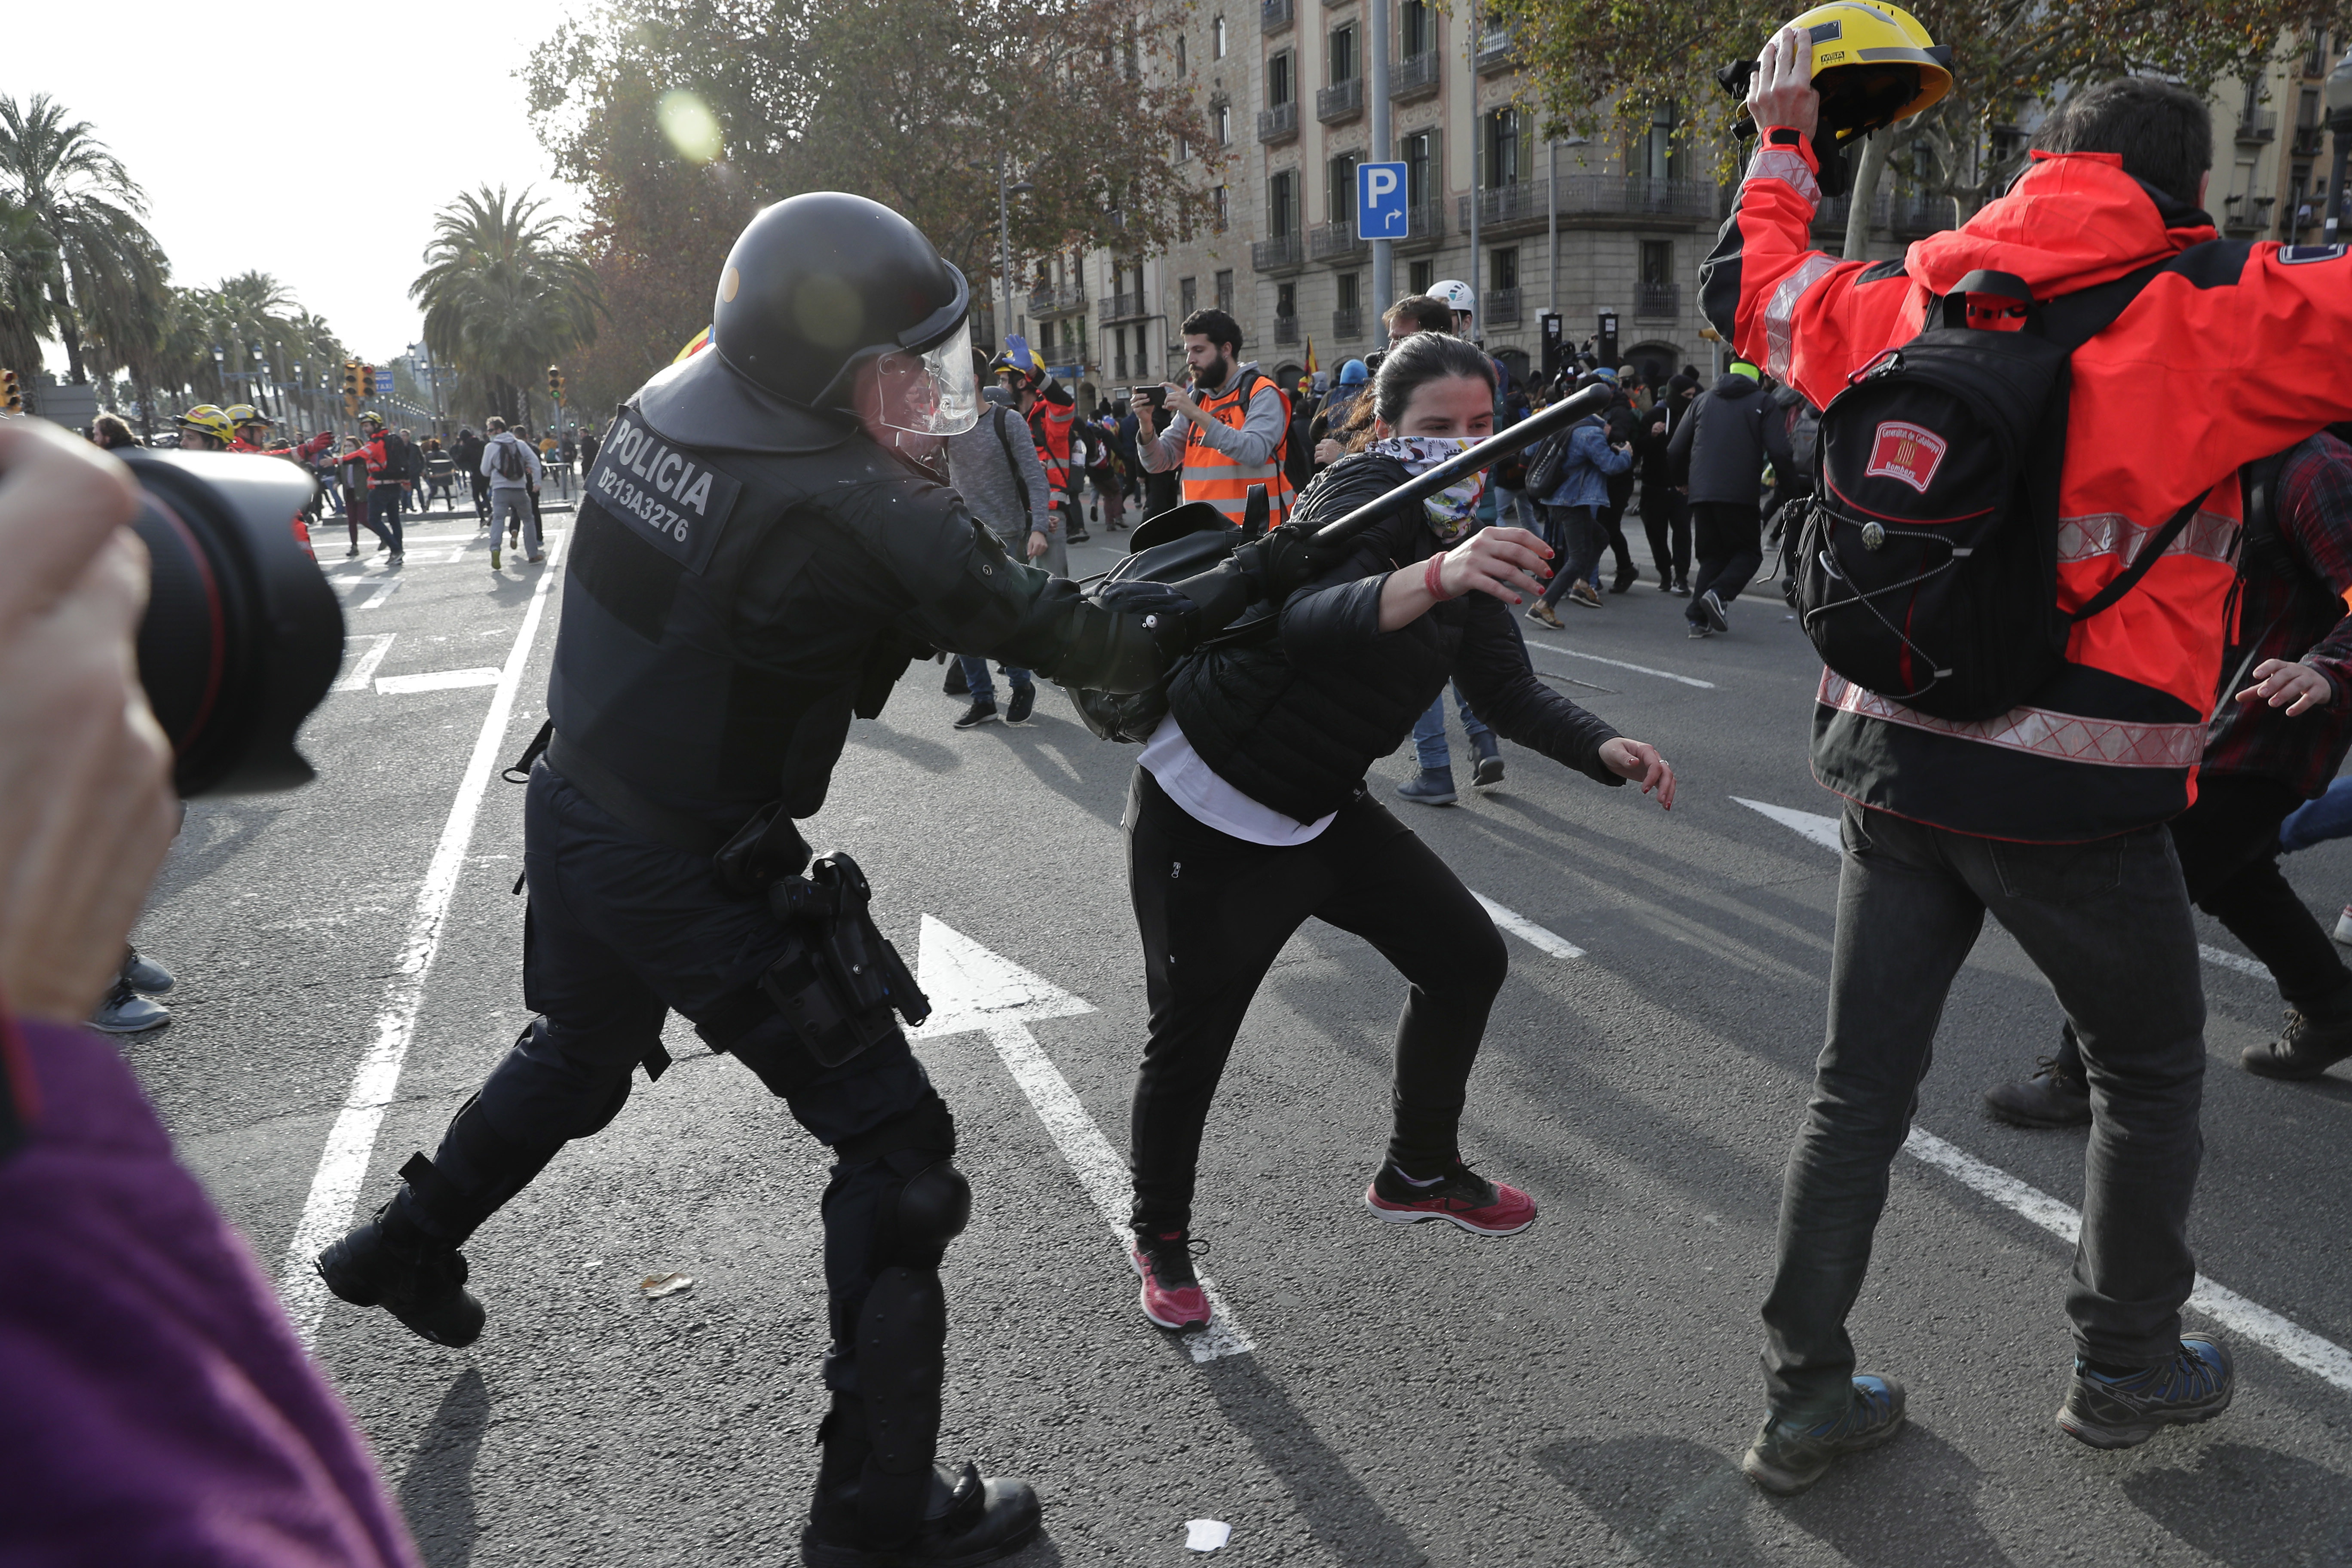 A police officer beats a demonstrator during a protest against Spain's cabinet holding a meeting in Barcelona Spain, Friday Dec. 21, 2018. Scuffles broke out between protesters trying to reach the venue of the cabinet meeting and police trying to stop them on Friday in central Barcelona after pro-independence organizations called for peaceful demonstrations against the meeting across the city. (AP Photo/Manu Fernandez)